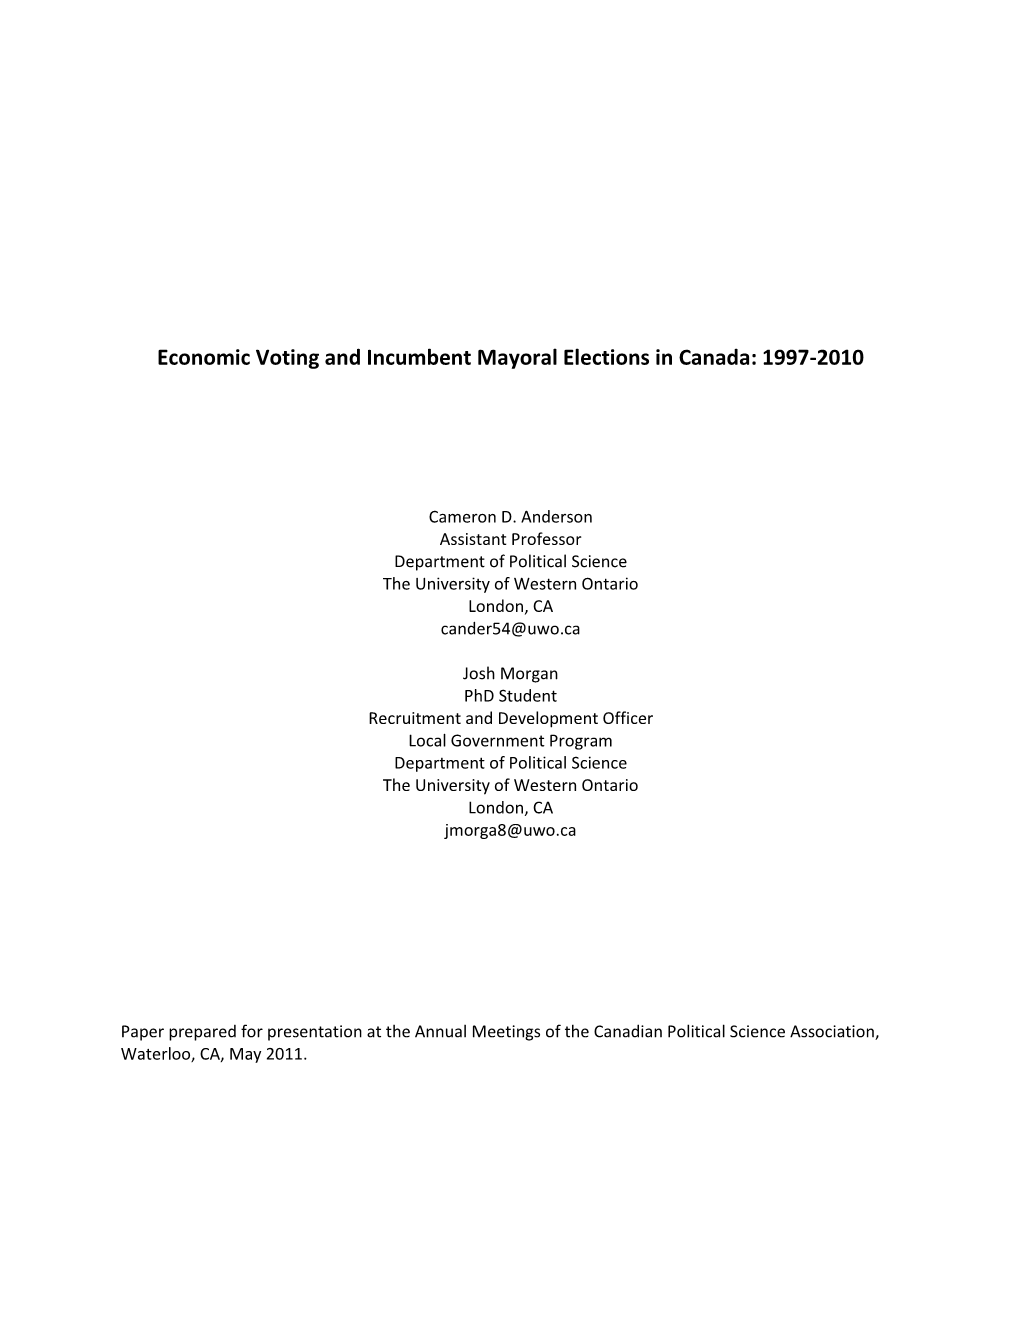 Economic Voting and Incumbent Mayoral Elections in Canada: 1997-2010